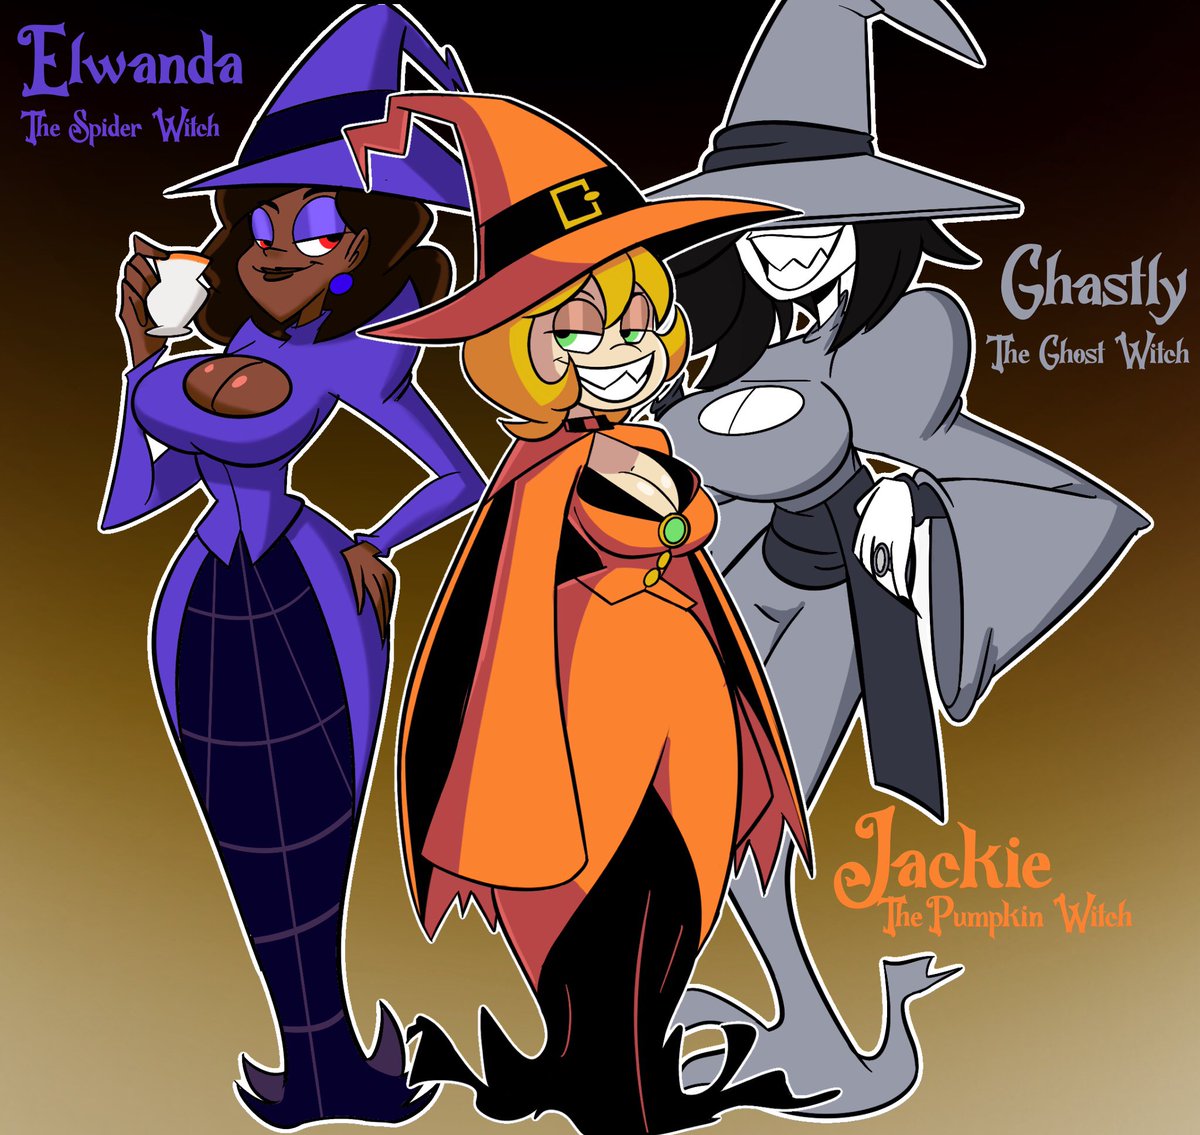 Reviving on very old OC, reintroducing Elwanda the Spider Witch. 